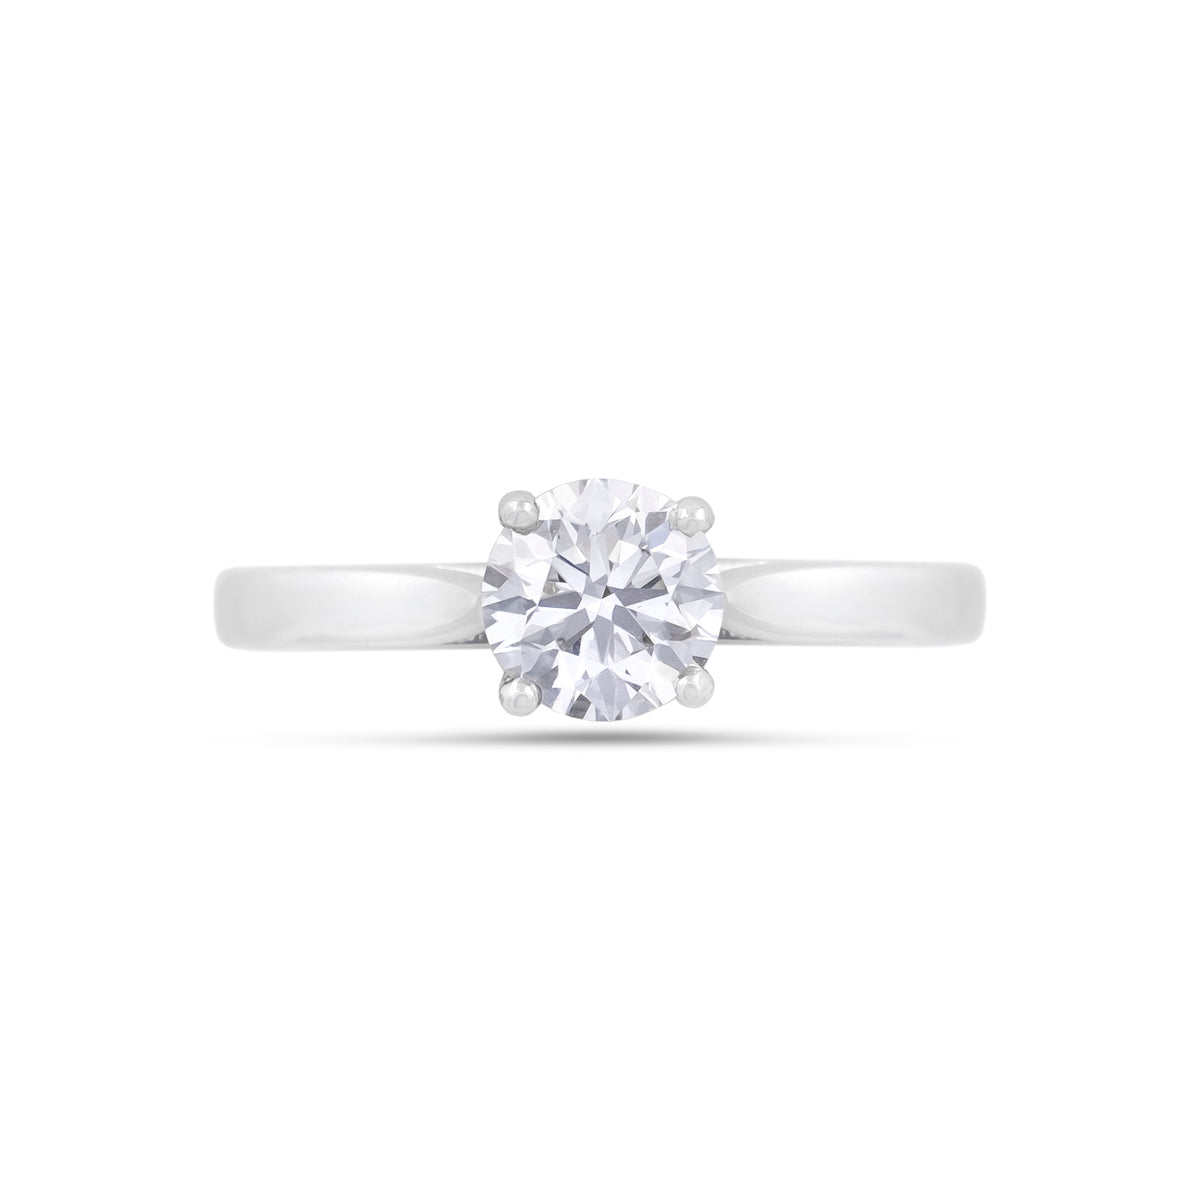 A lab-diamond solitaire engagement ring featuring an incredible 1.00ct brilliant-cut lab-diamond in a four claw setting. The diamond is certificated 1.00ct, D colour, VS1 clarity.